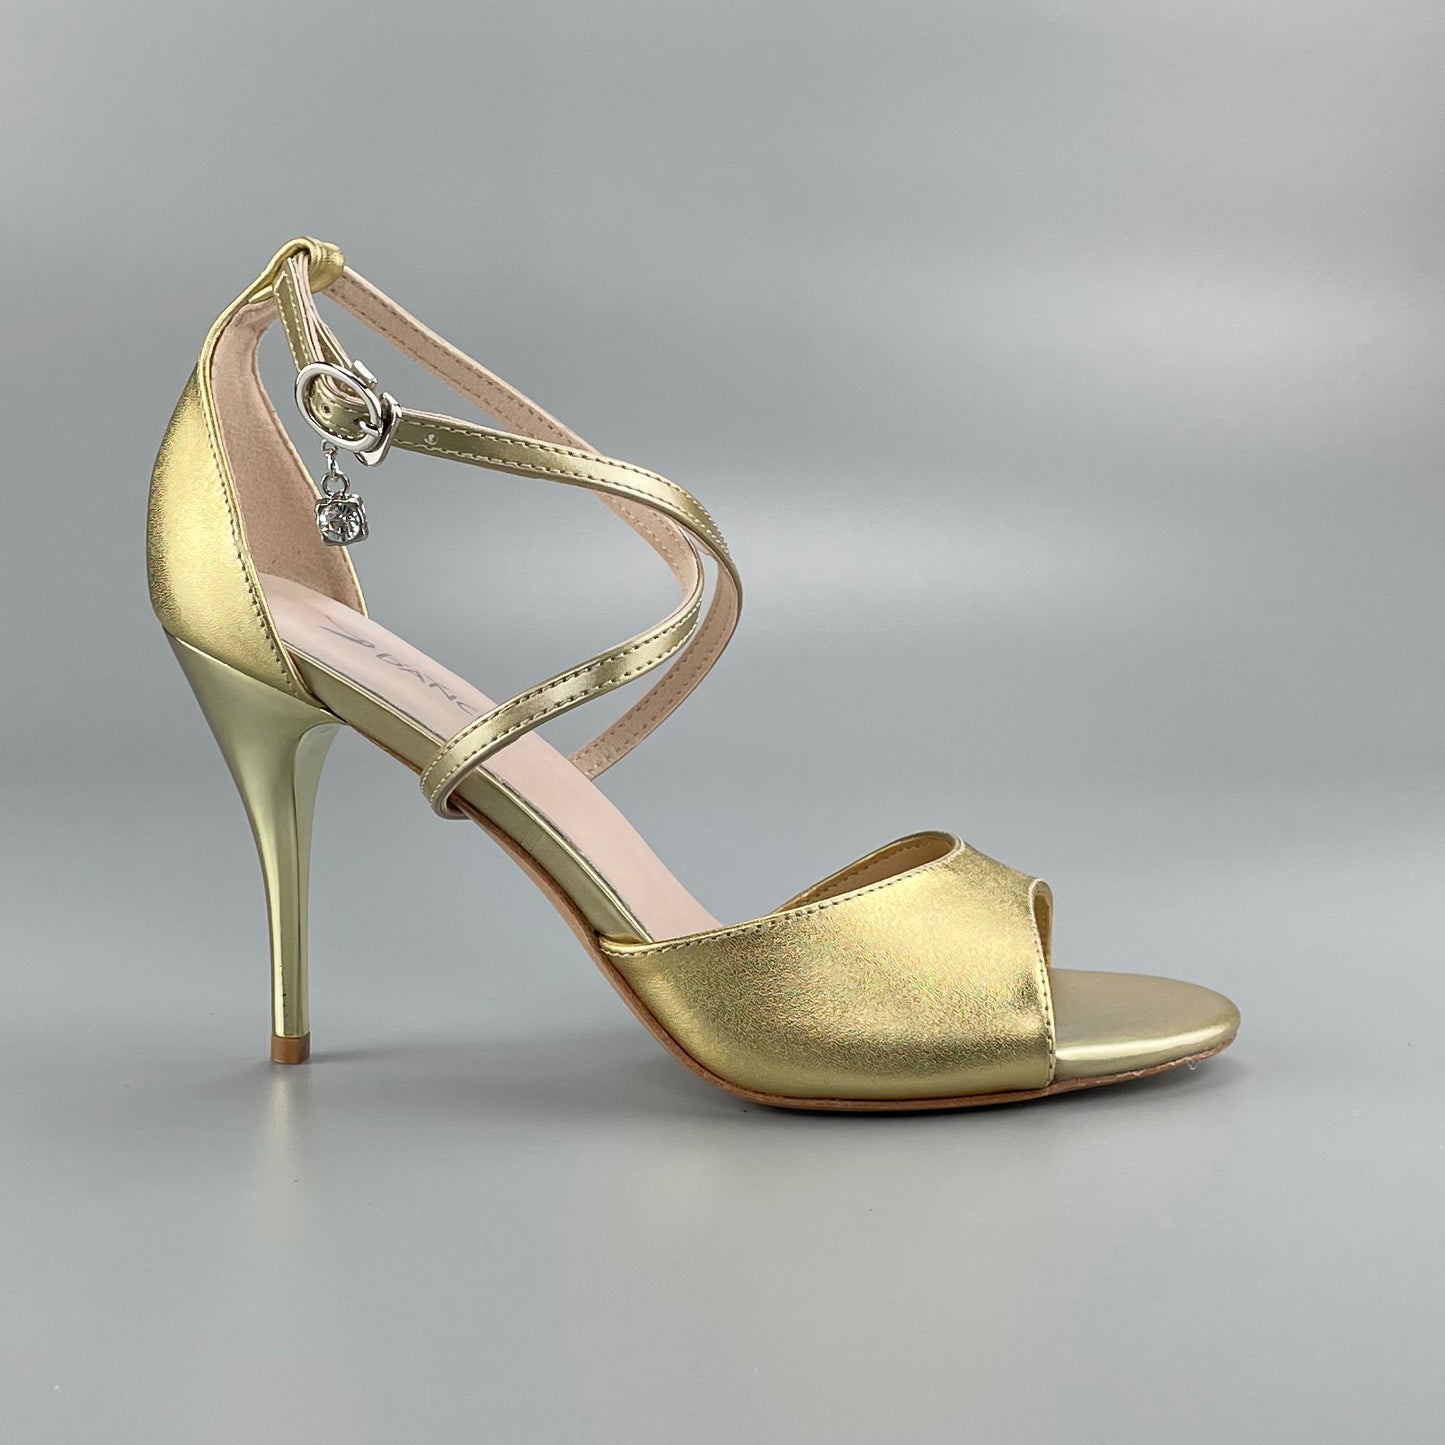 Pro Dancer Open-toe and Closed-back Argentine Tango Shoes High Salsa Heels Hard Leather Sole Sandals Gold (PD-9045A)